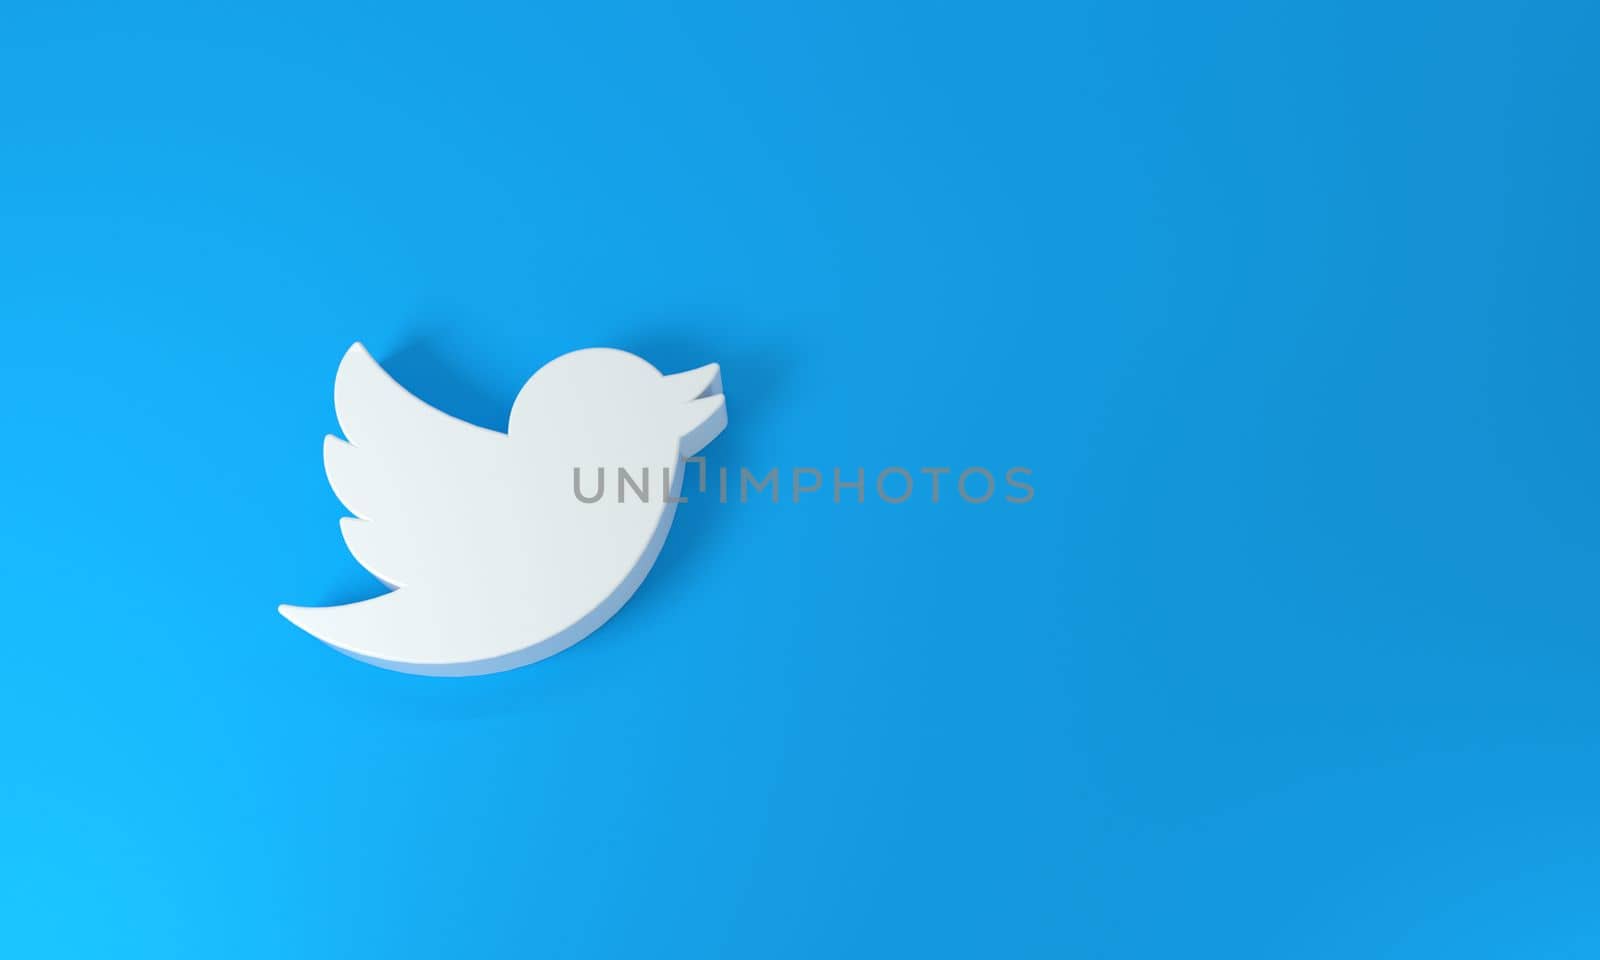 Twitter logo on blue background - top view. 3D rendering.